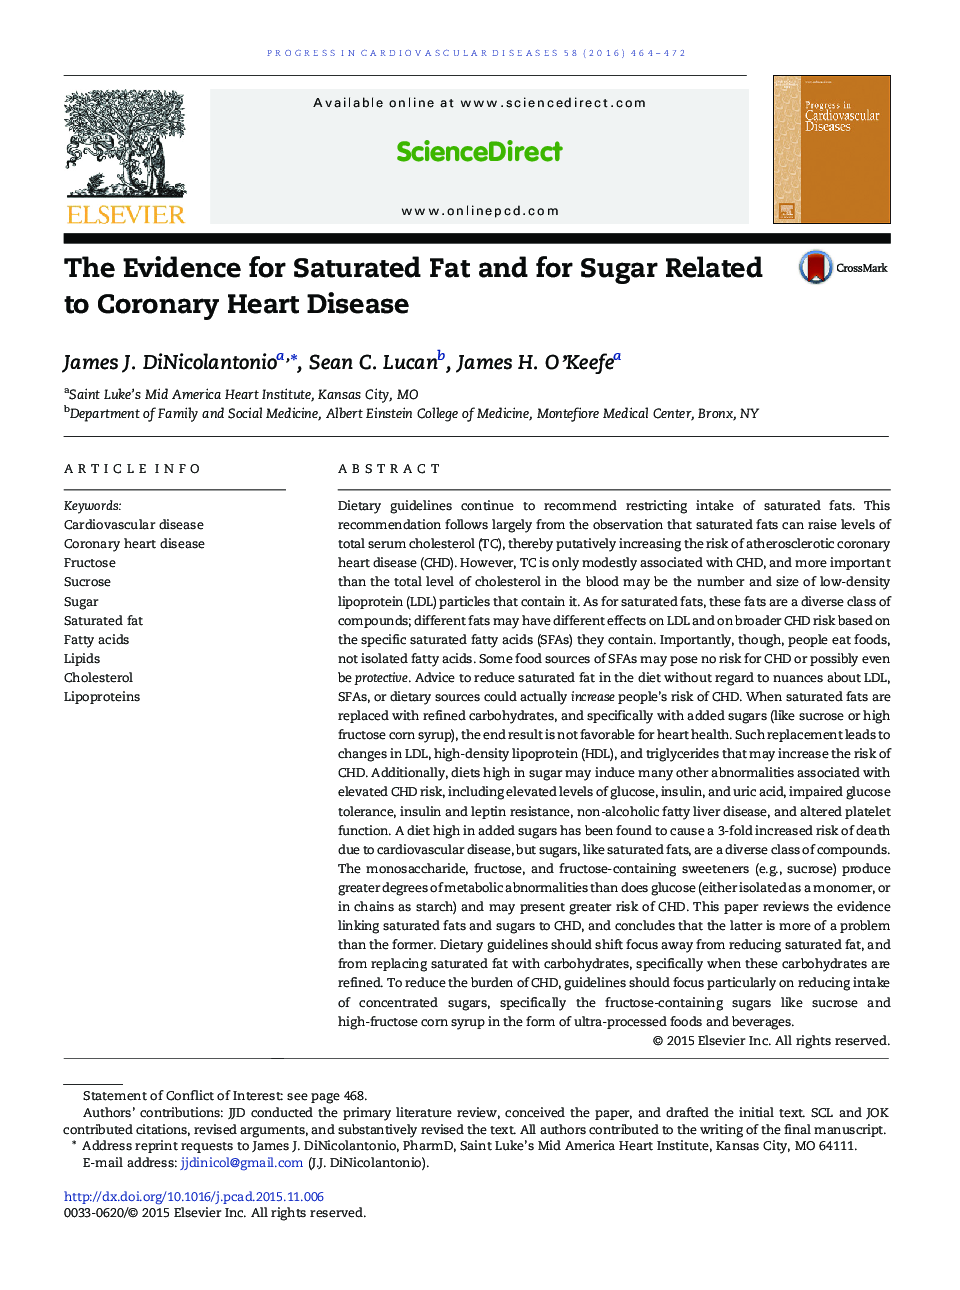 The Evidence for Saturated Fat and for Sugar Related to Coronary Heart Disease 